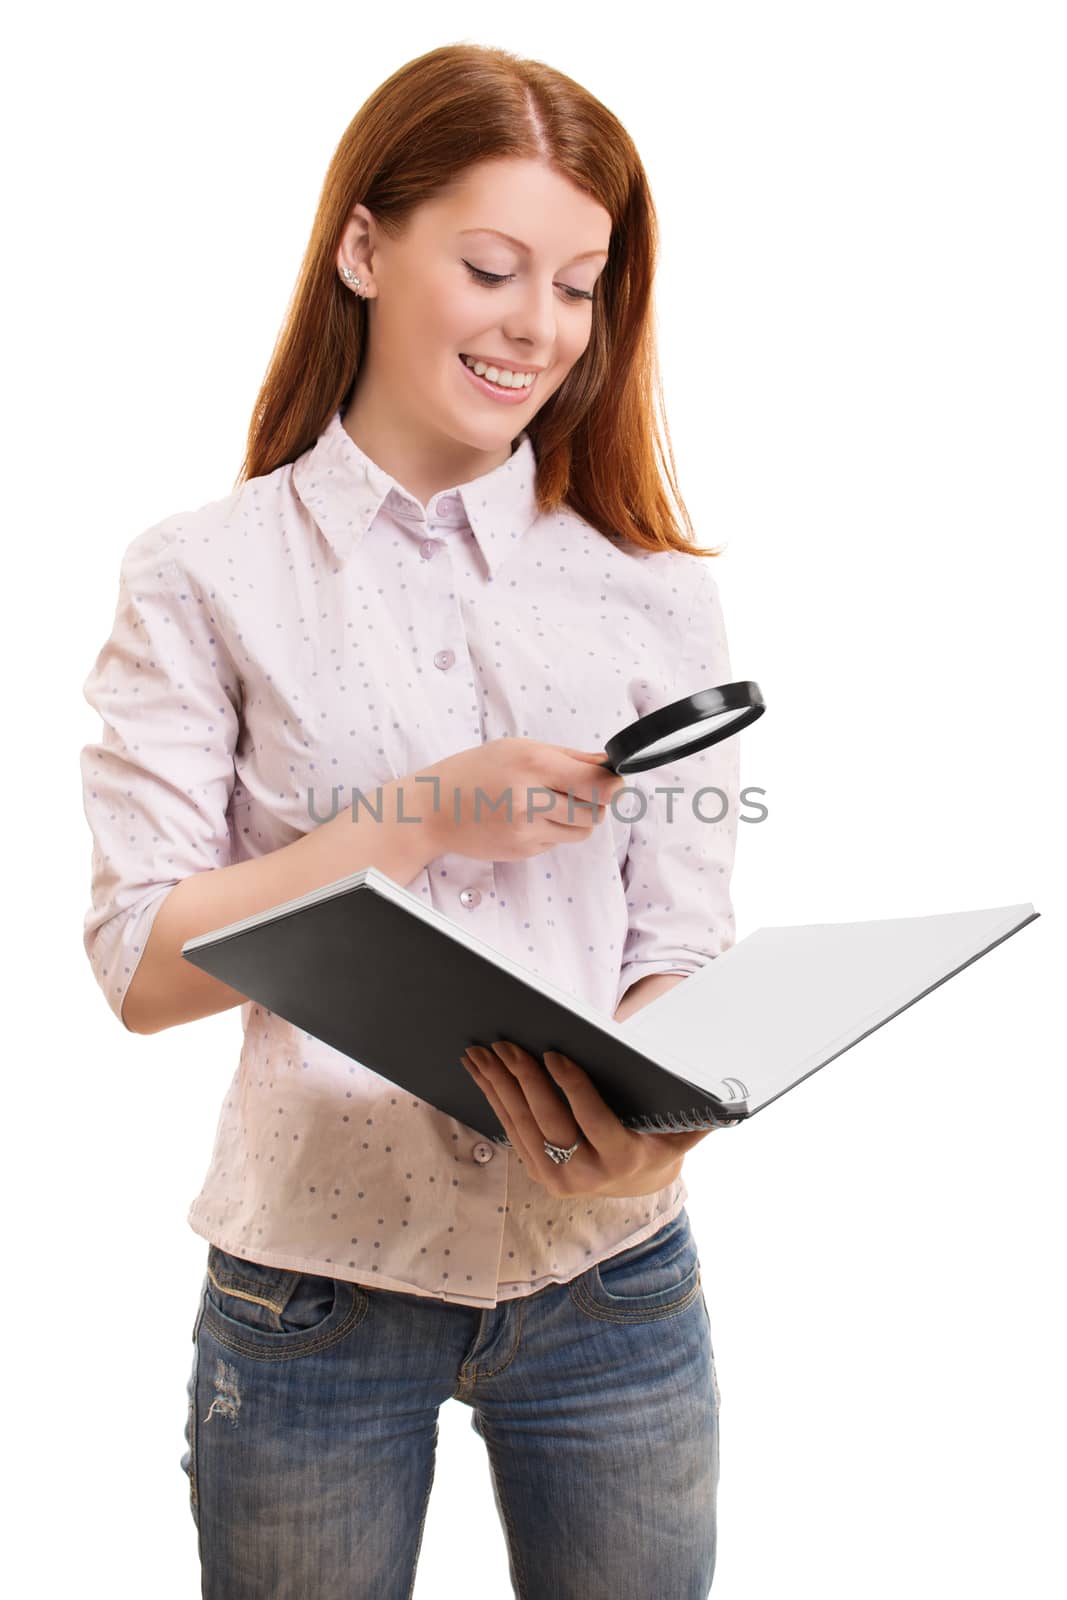 Smiling female student holding a magnifying glass by Mendelex